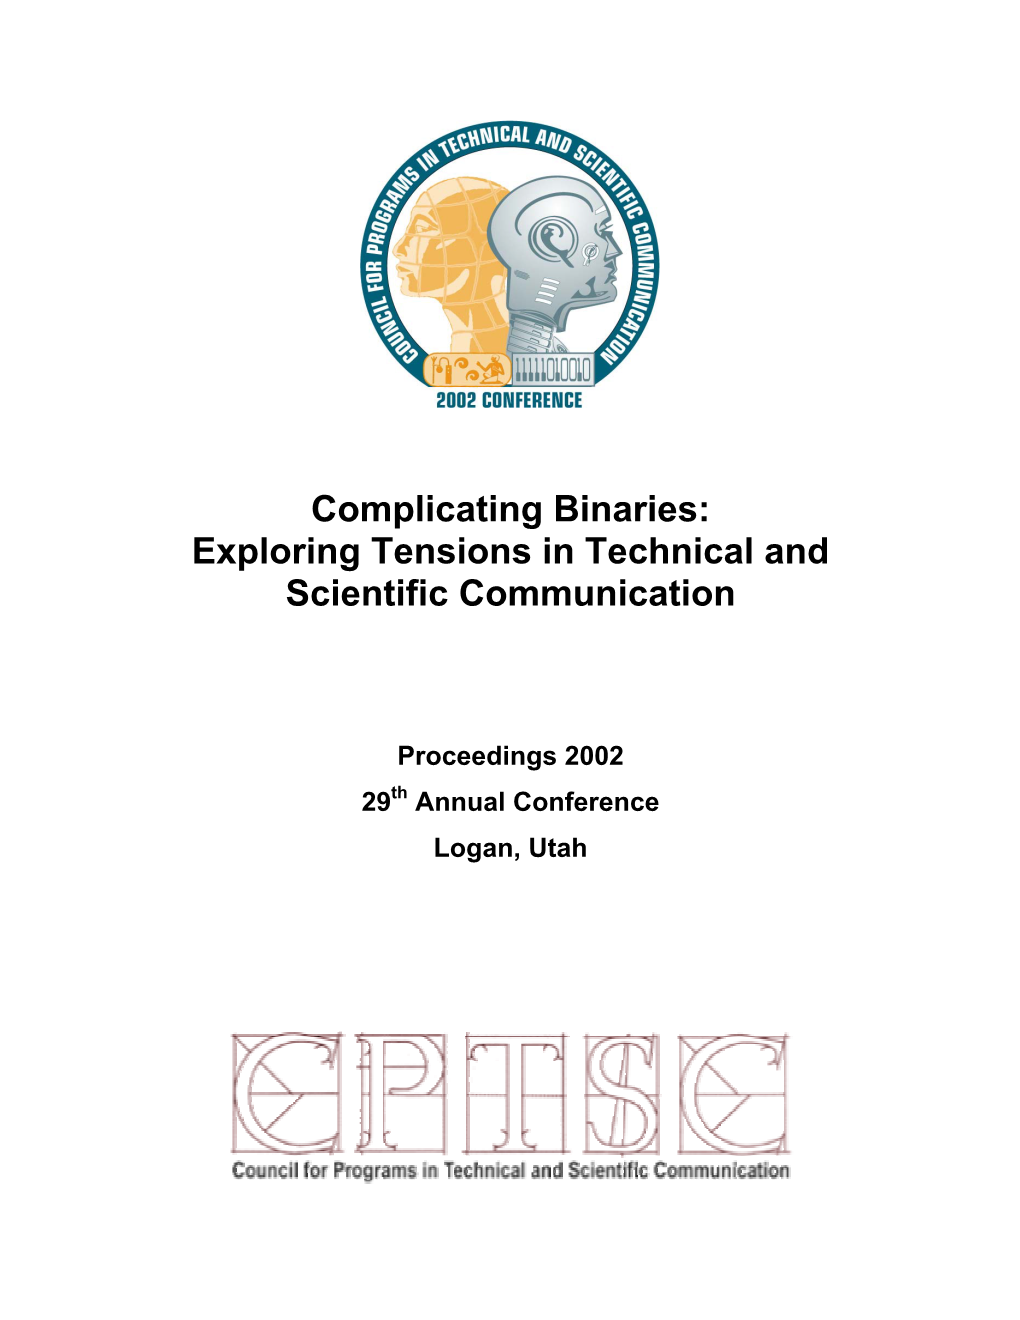 Complicating Binaries: Exploring Tensions in Technical and Scientific Communication